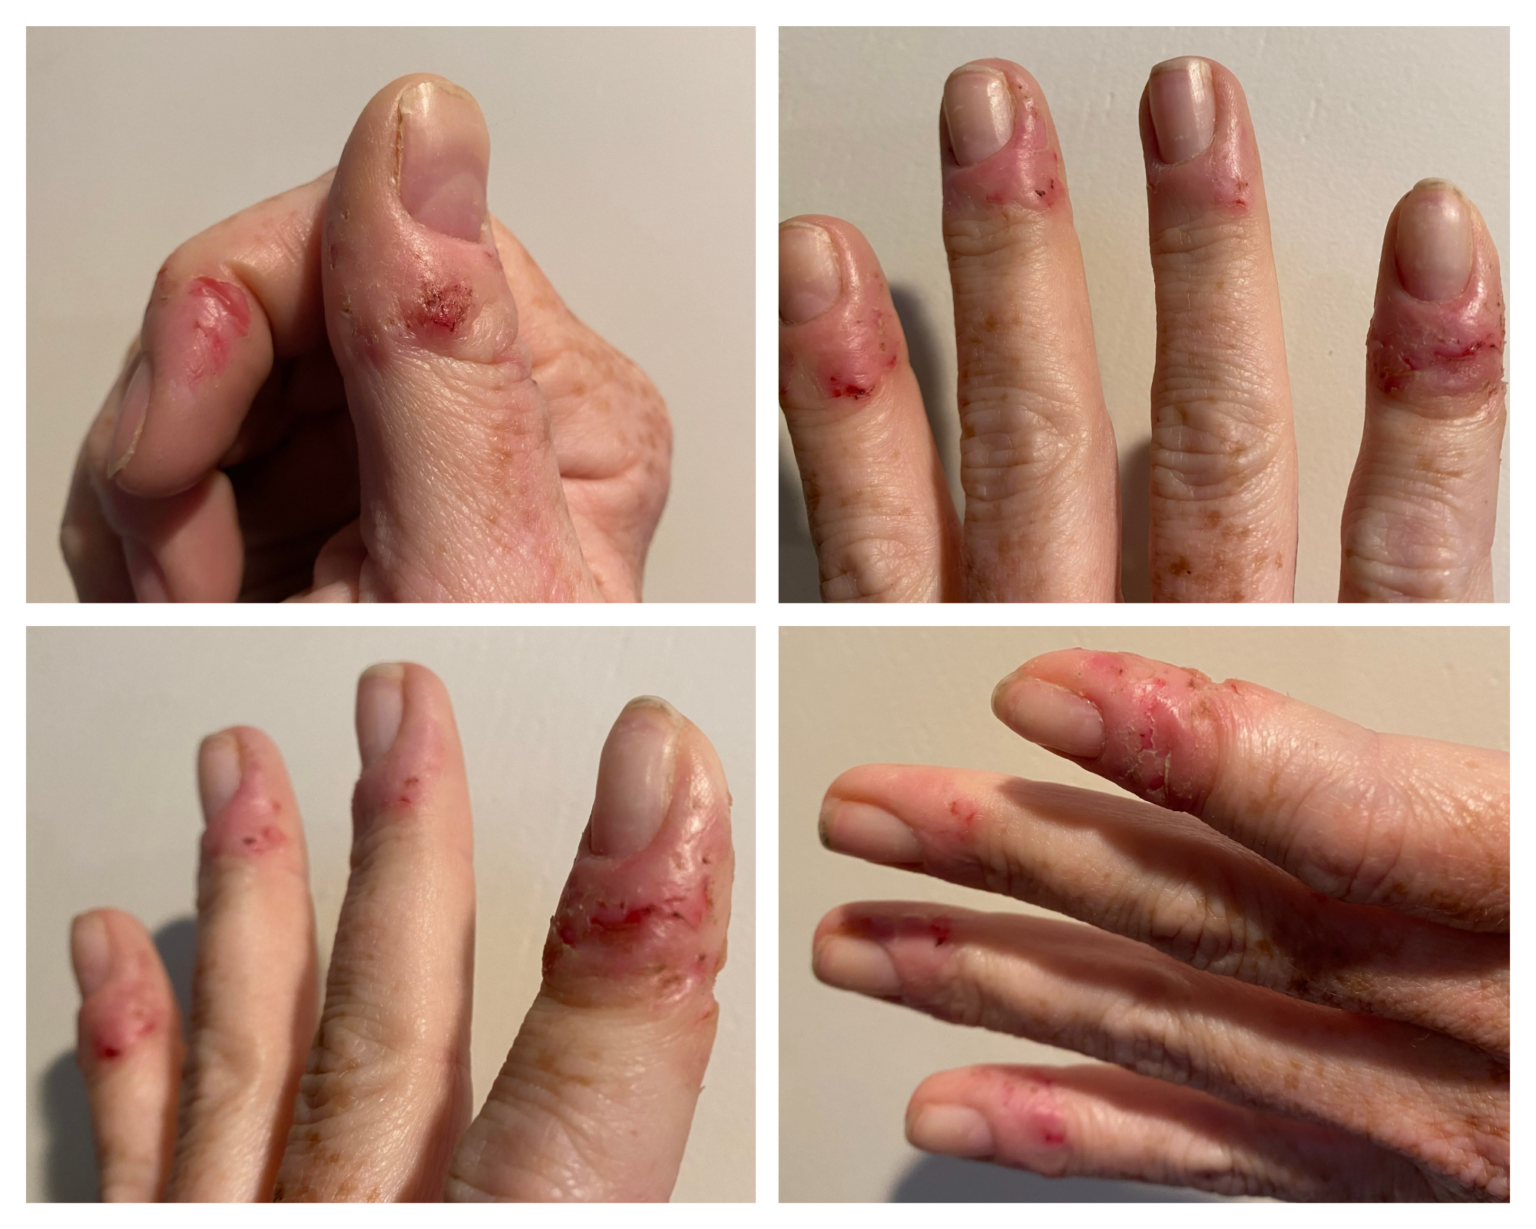 What Is Dermatophagia And Why Do People Do This To Themselves